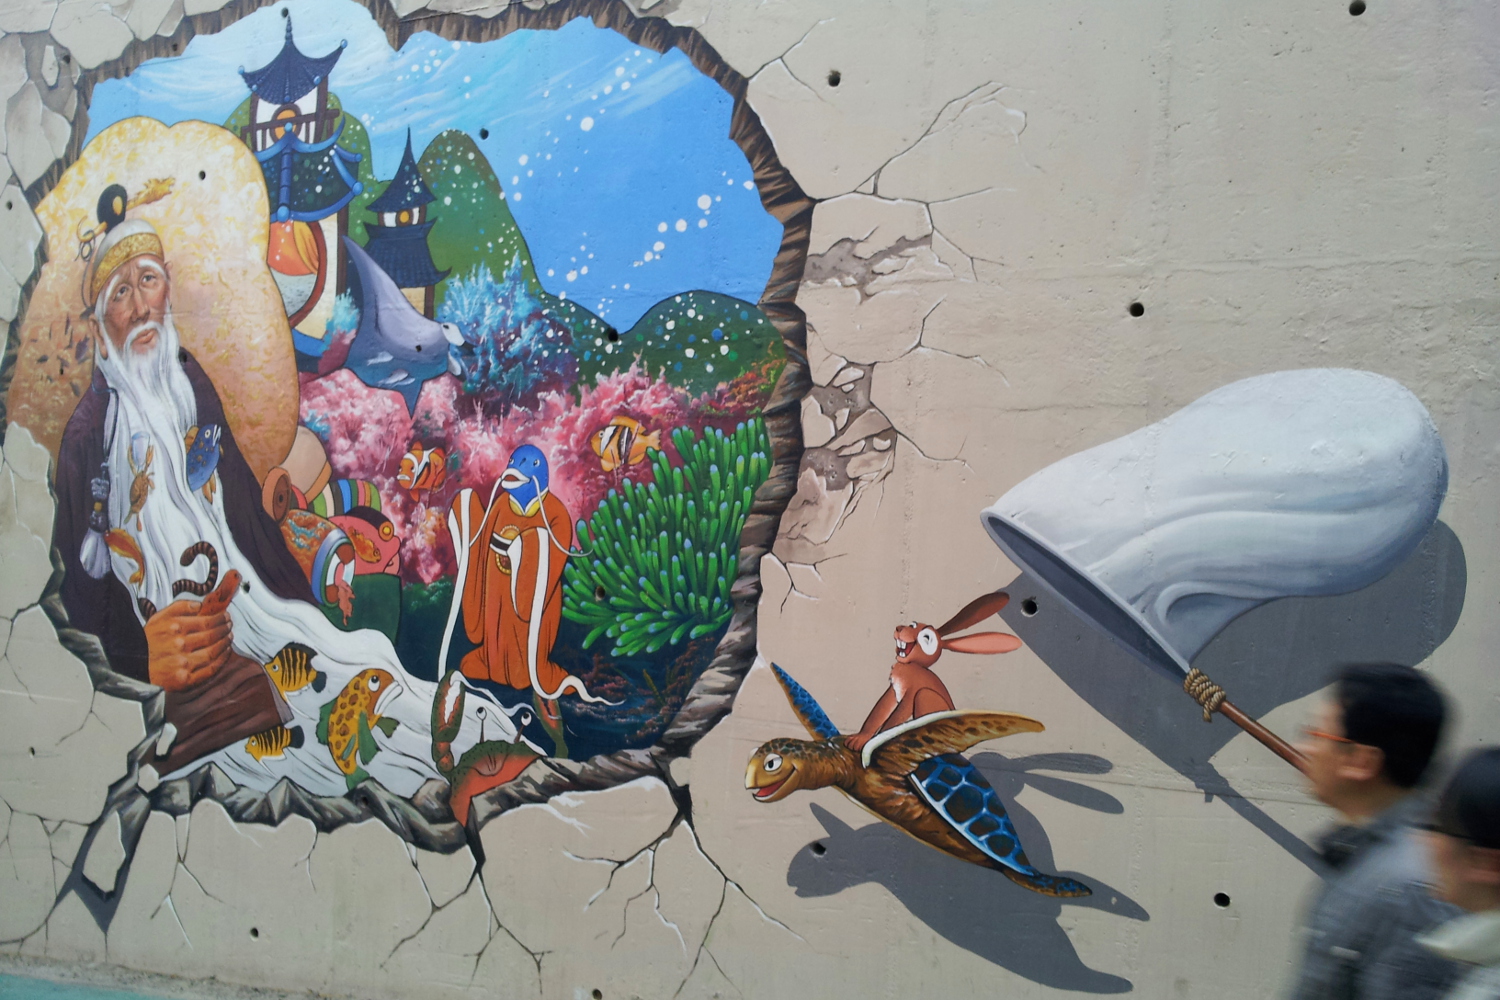 Fairytale mural for a fairytale village in Songwol-dong. Image by Trent Holden / Lonely Planet